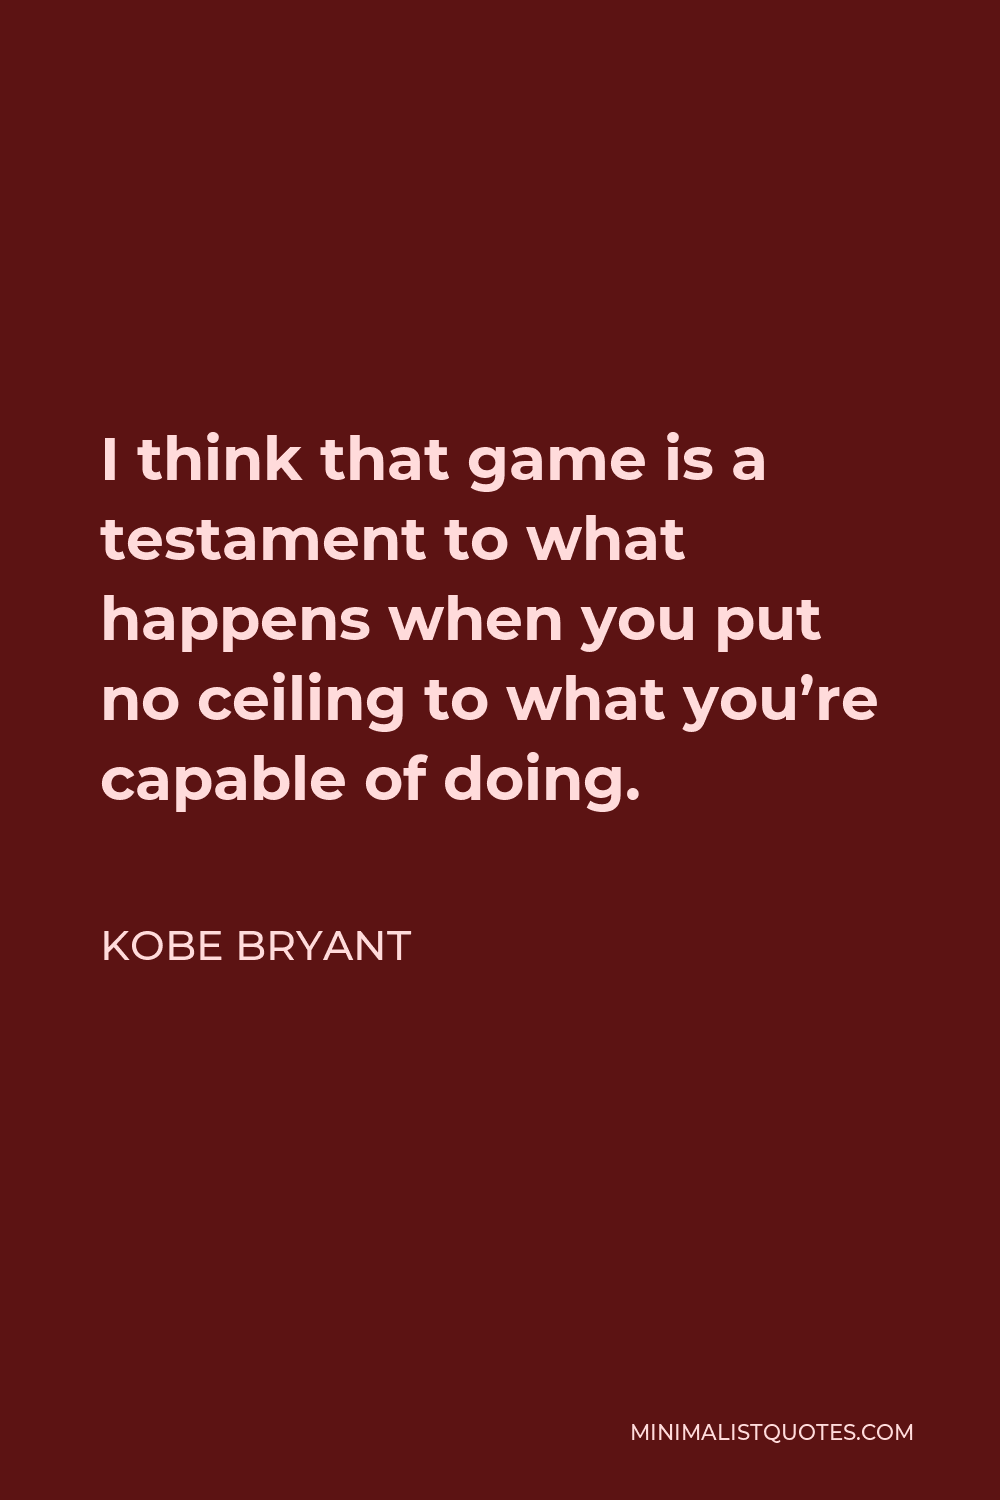 Kobe Bryant Quote - I think that game is a testament to what happens when you put no ceiling to what you’re capable of doing.